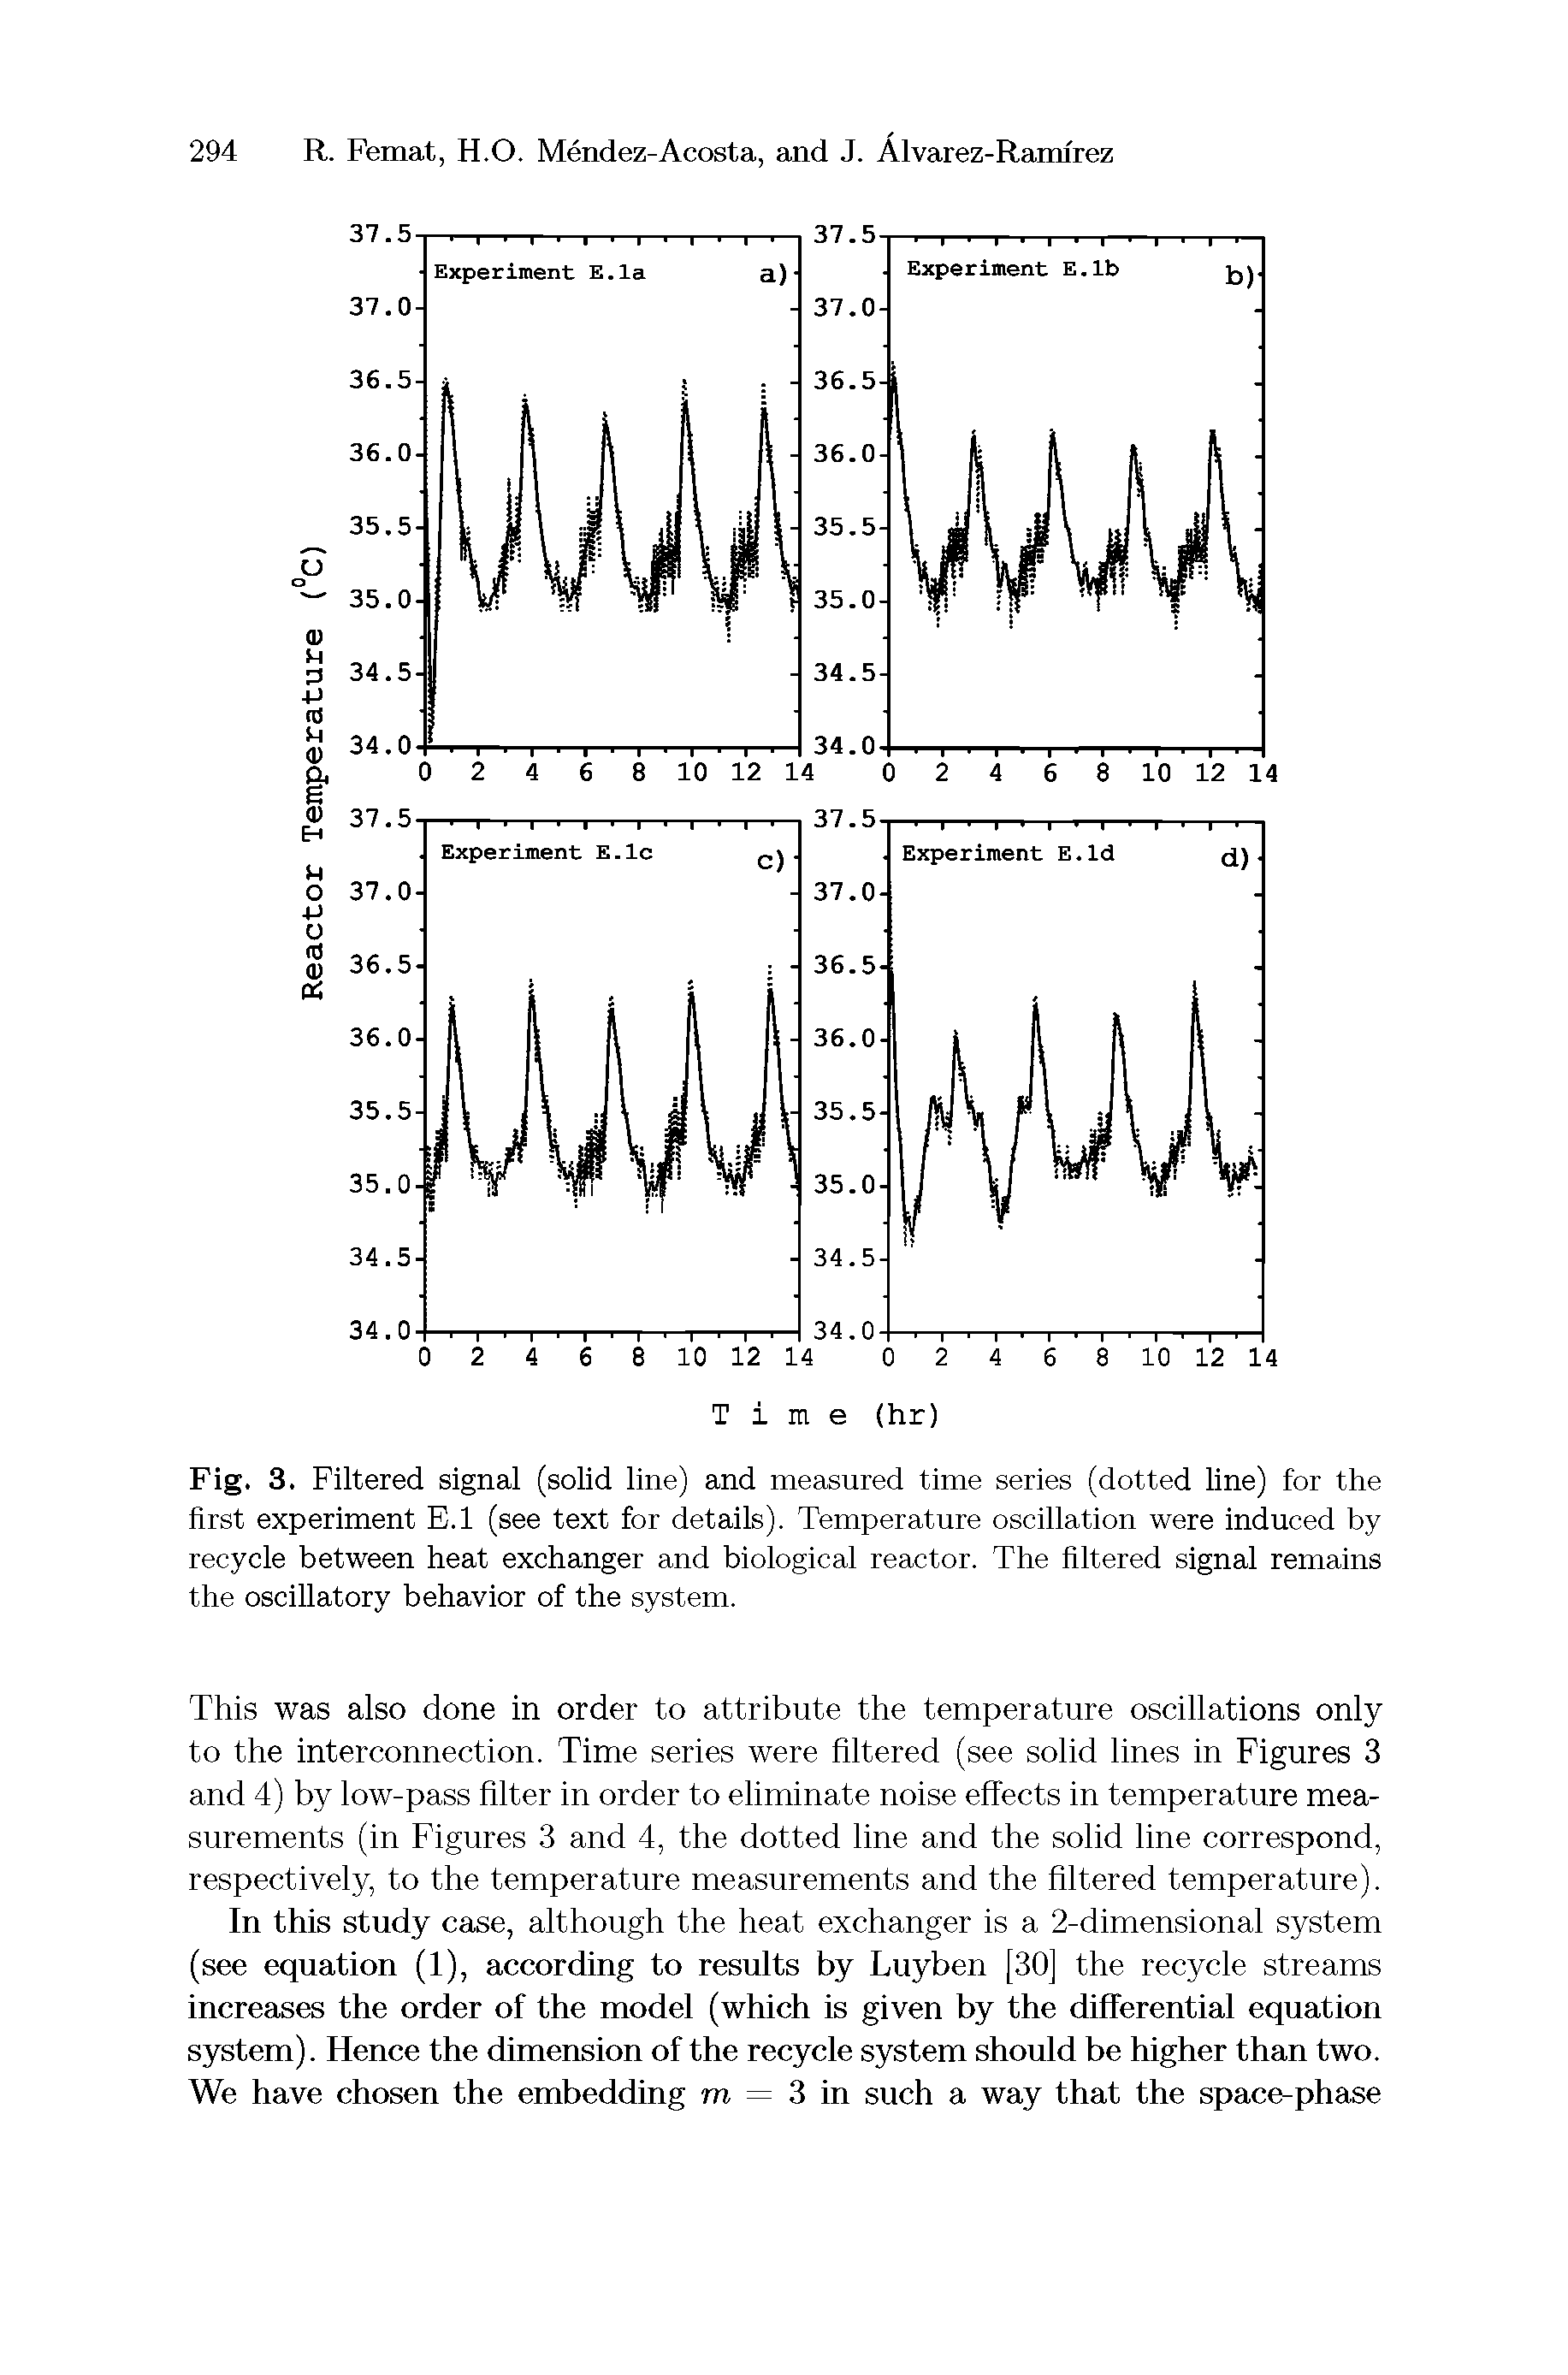 Fig. 3. Filtered signal (solid line) and measured time series (dotted line) for the first experiment E.l (see text for details). Temperature oscillation were induced by recycle between heat exchanger and biological reactor. The filtered signal remains the oscillatory behavior of the system.